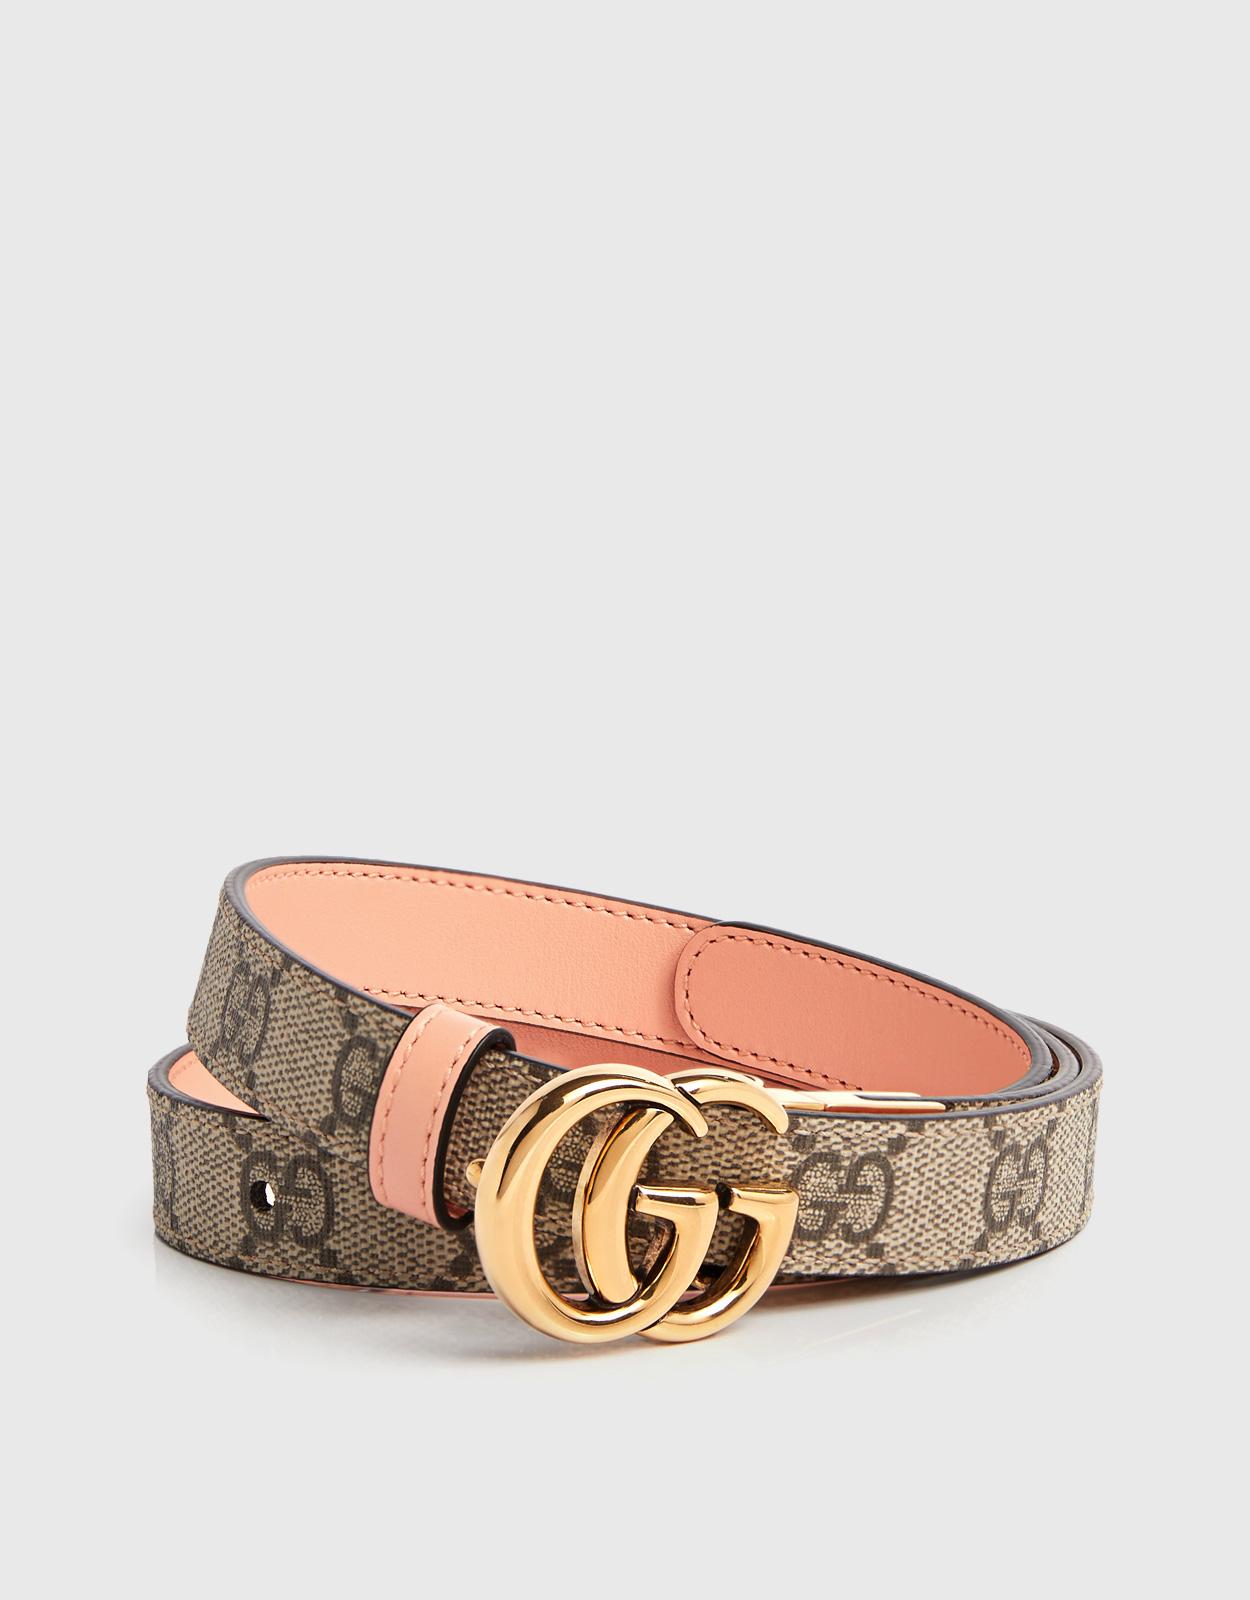 Gucci GG Marmont Canvas-jacquard and Leather Belt